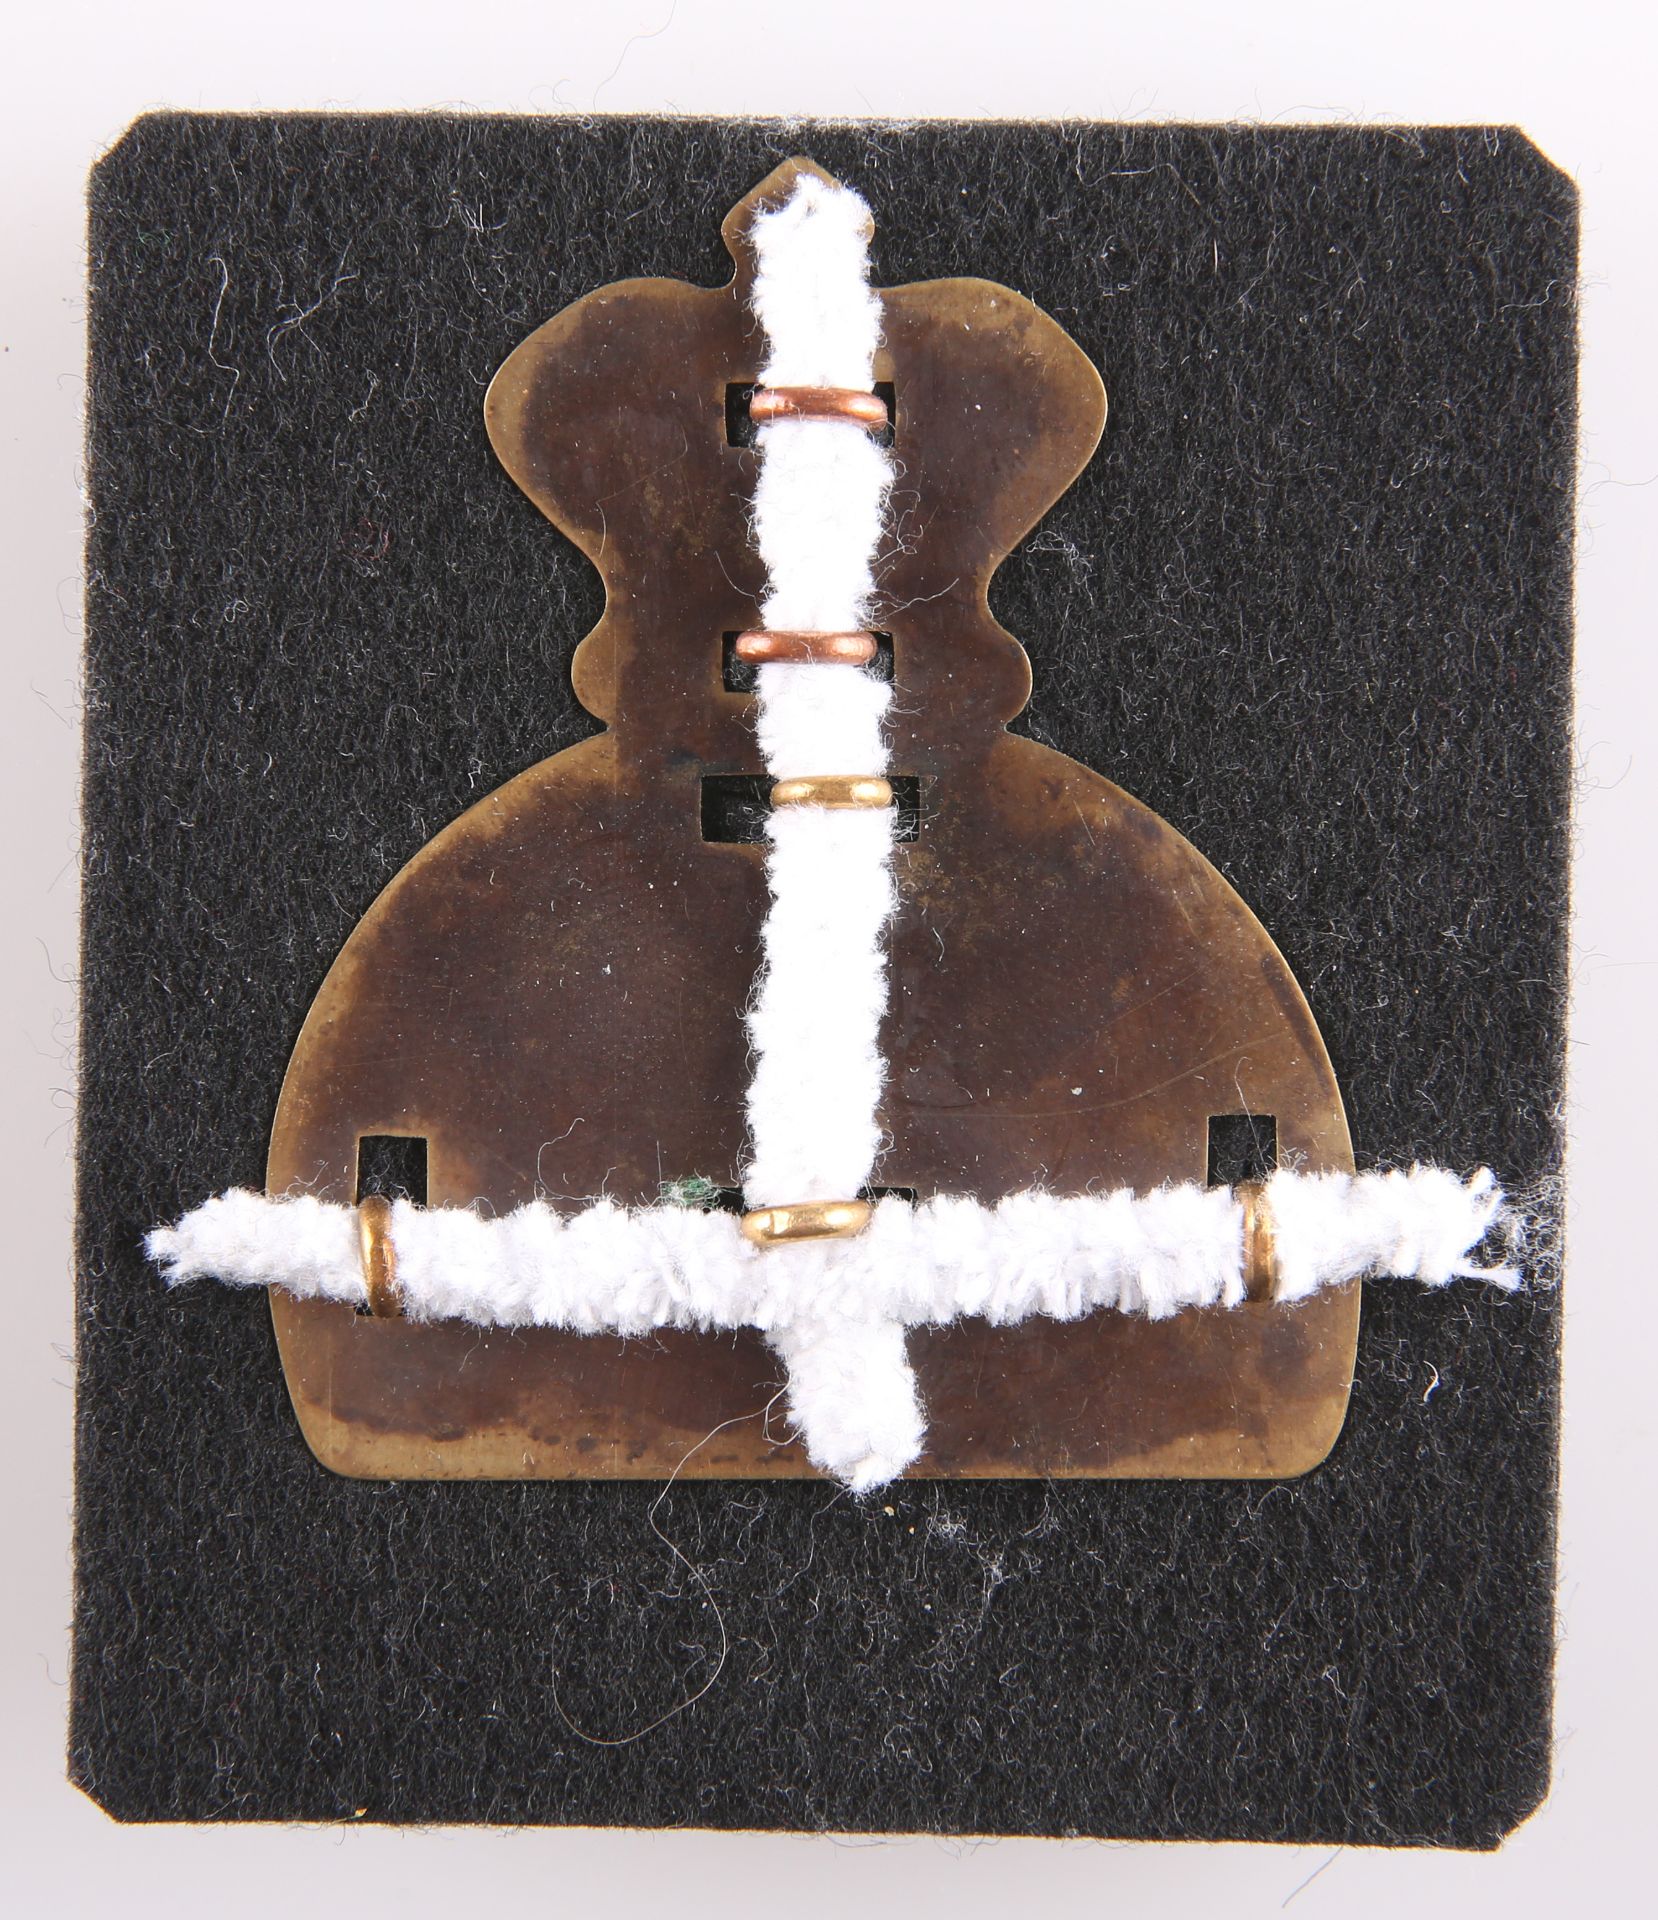 A POST-1881 OTHER RANKS' PATTERN THREE-PIECE GLENGARRY BADGE OF THE NORTHAMPTONSHIRE REGIMENT - Image 2 of 2